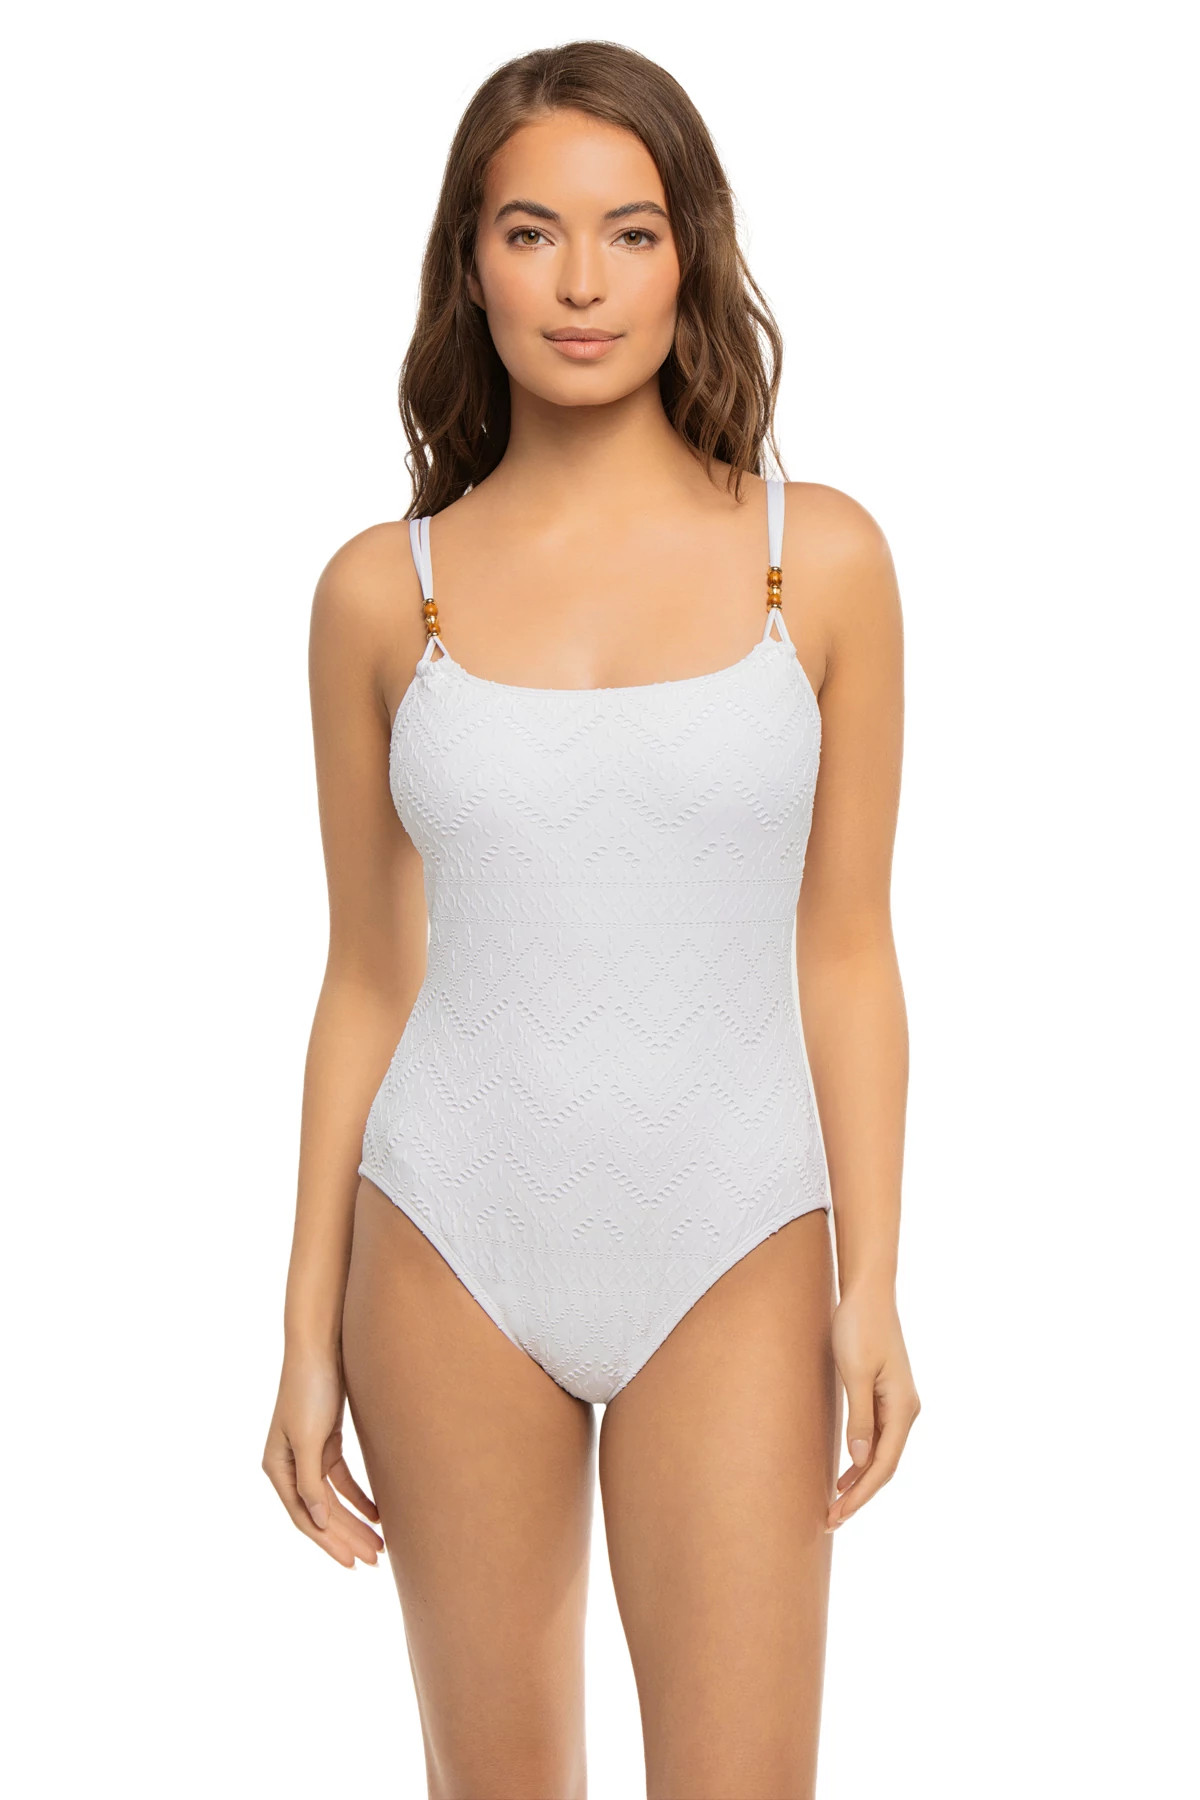 WHITE Saltwater Sands Lingerie One Piece Swimsuit image number 1